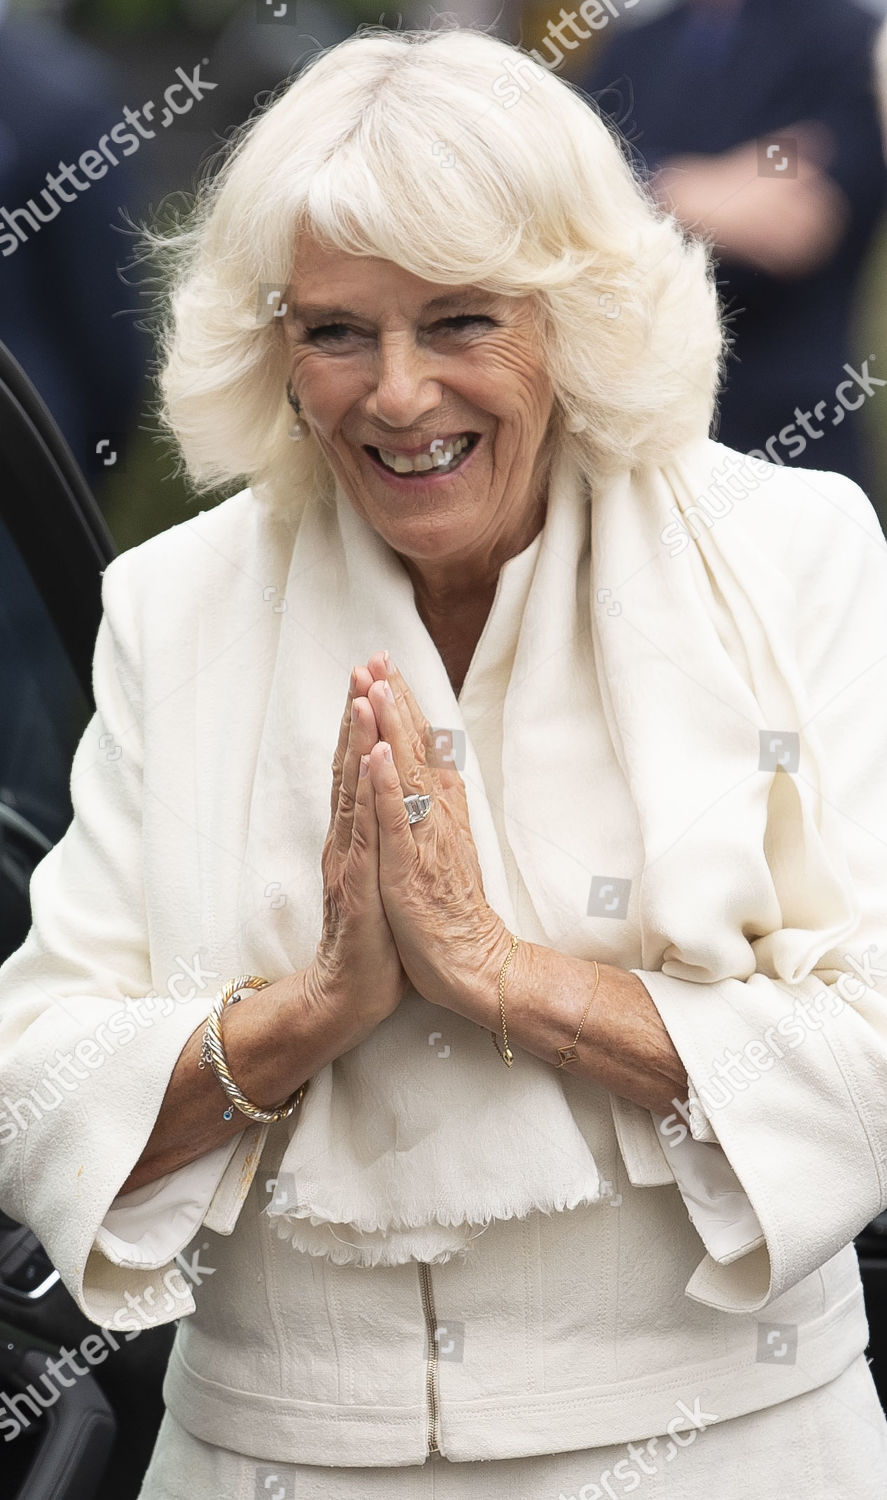 prince-charles-and-camilla-duchess-of-cornwall-visit-to-gloucester-uk-shutterstock-editorial-10706502s.jpg